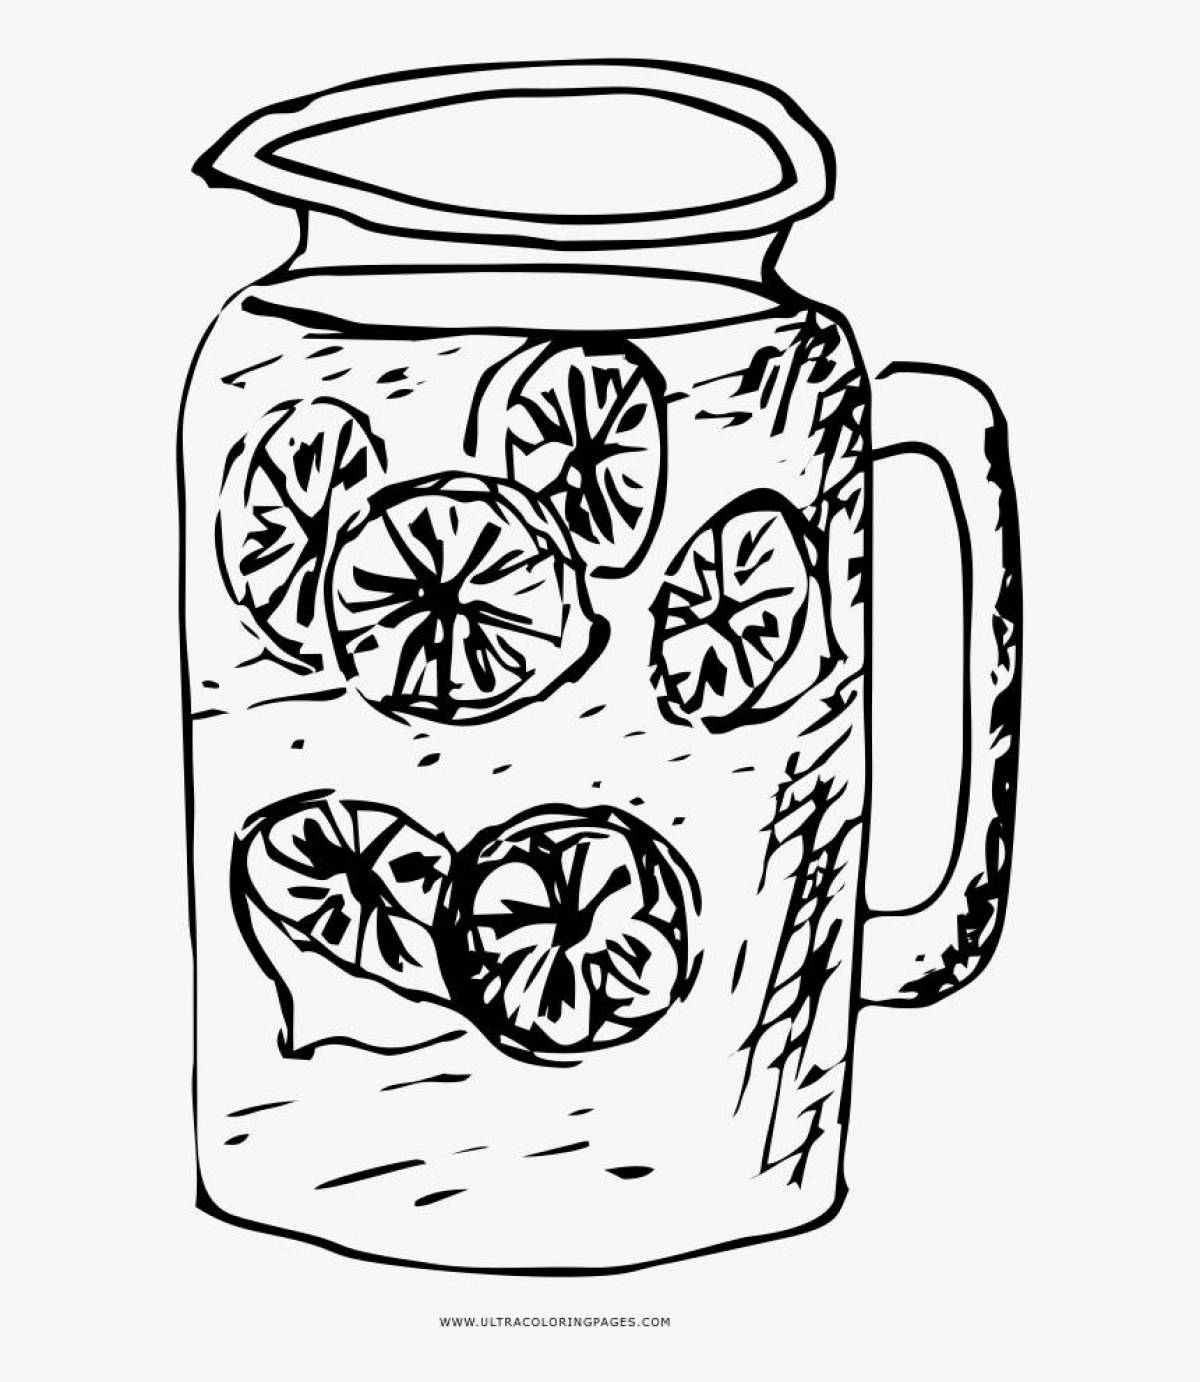 Adorable compote coloring page